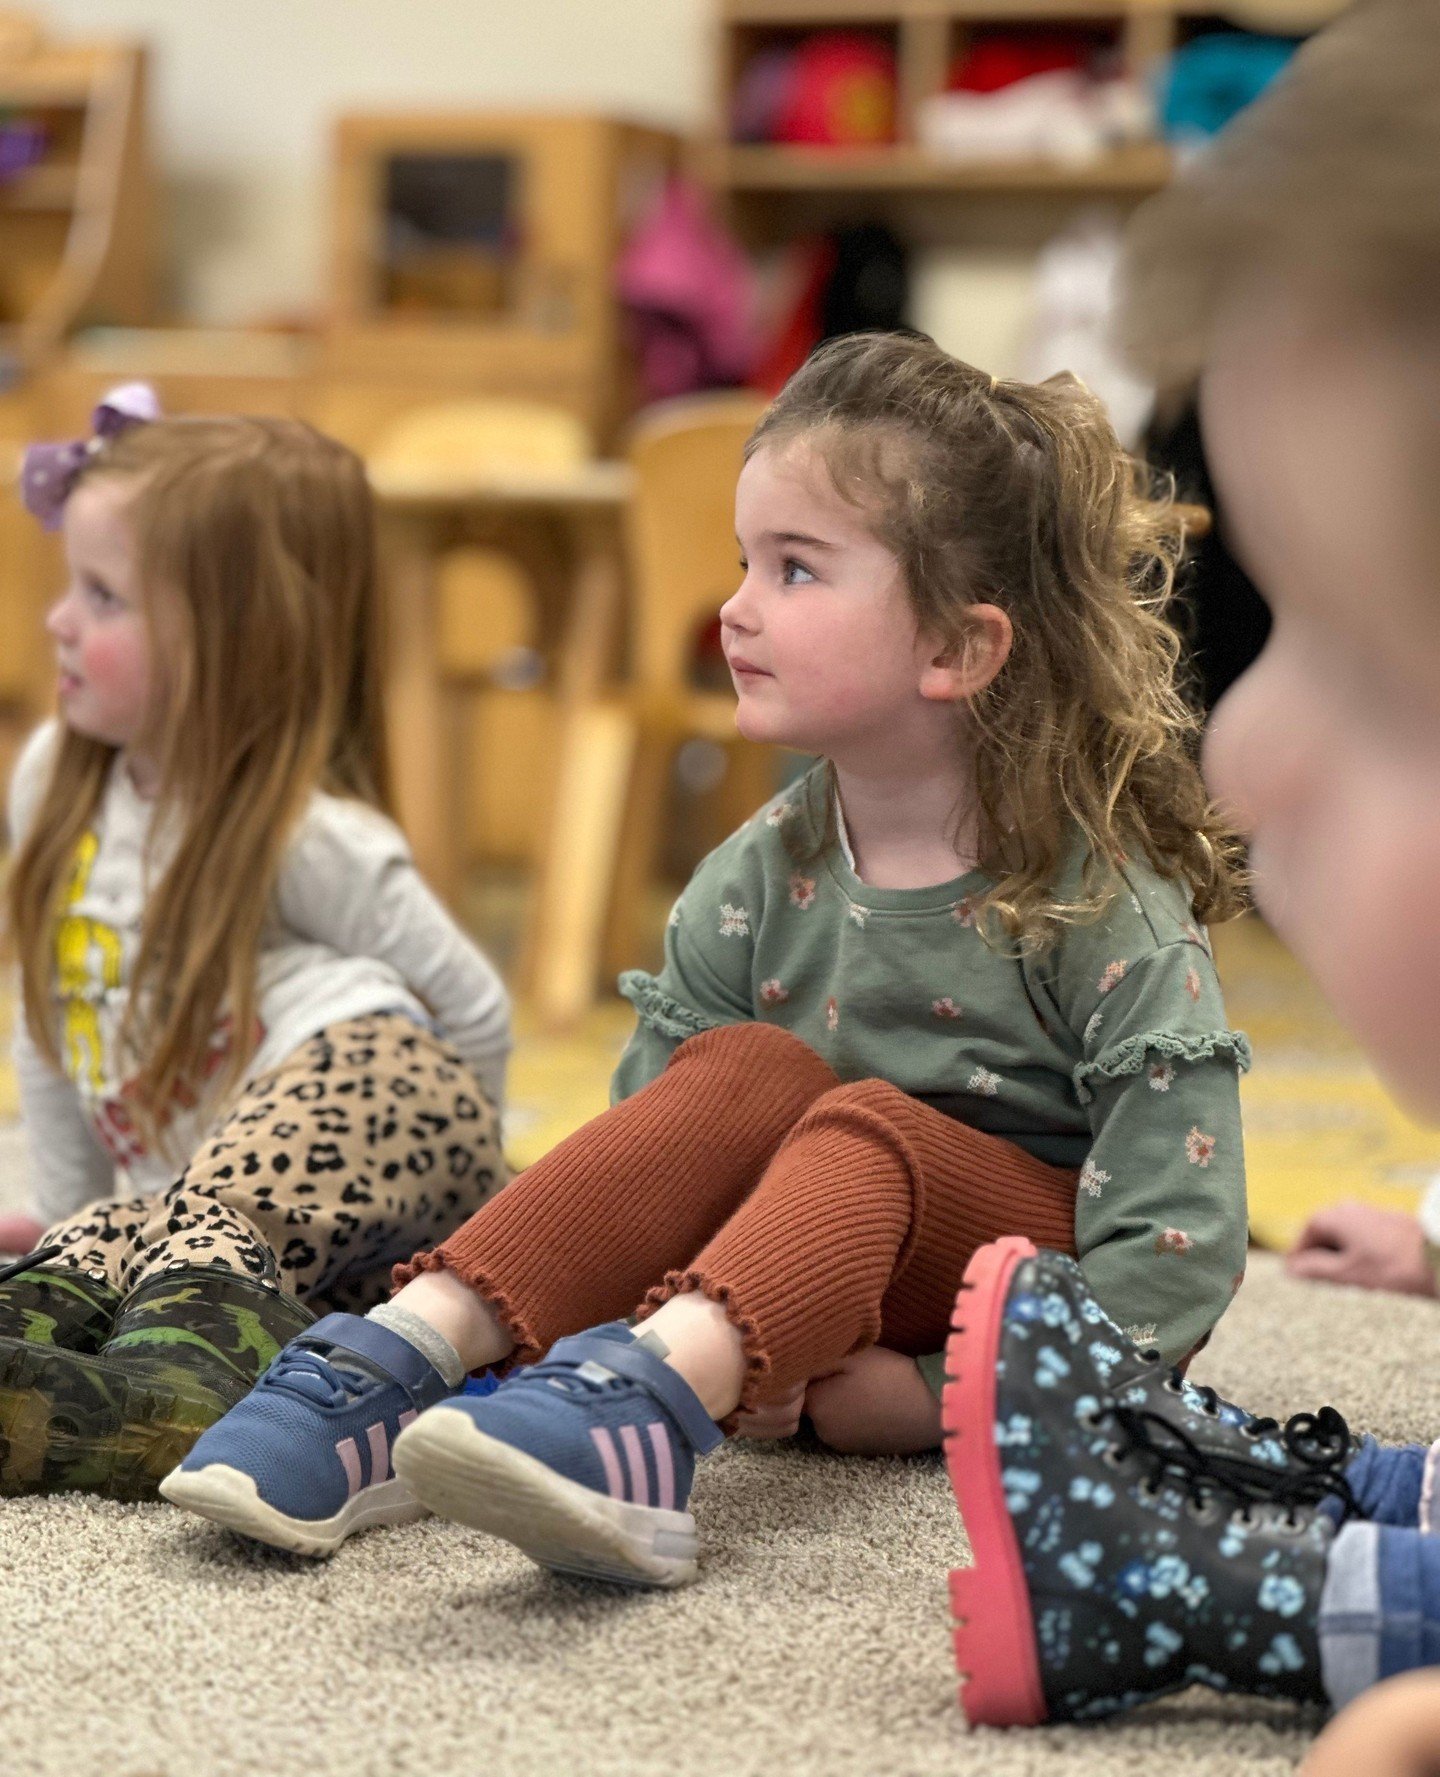 When not distracted, 3 year olds demonstrate active listening skills, focusing eyes, bodies, and attention on the person speaking.